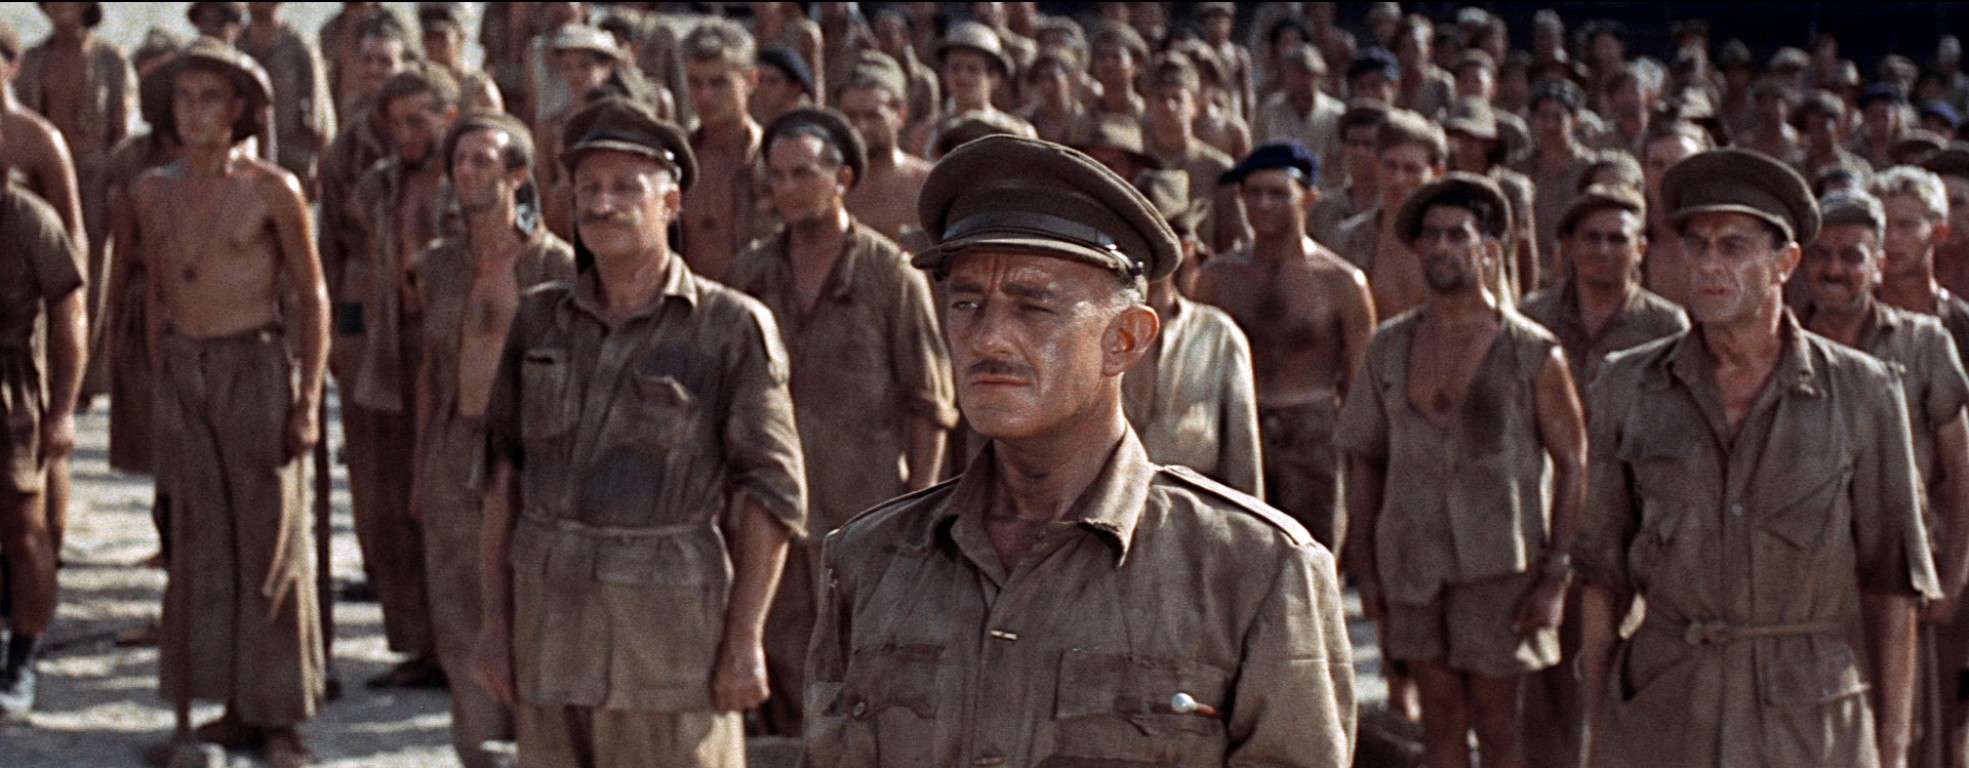 30th Academy Awards (1957): The Bridge on the River Kwai | Alec Guinness and James Donald in The Bridge on the River Kwai (1957)